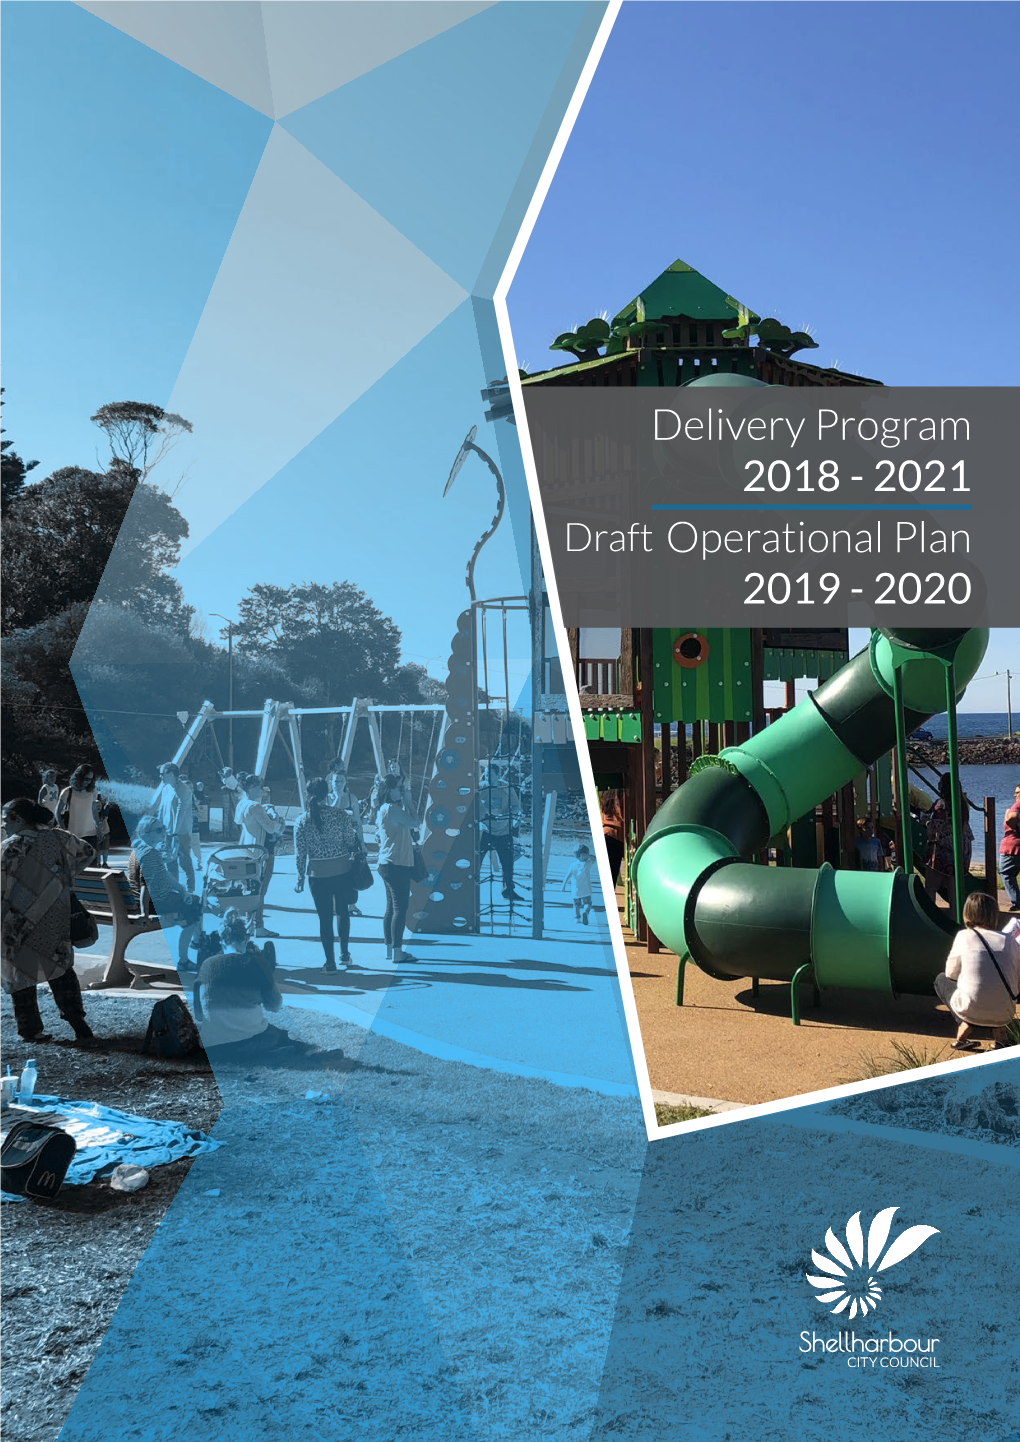 Delivery Program 2018 - 2021 Draft Operational Plan 2019 - 2020